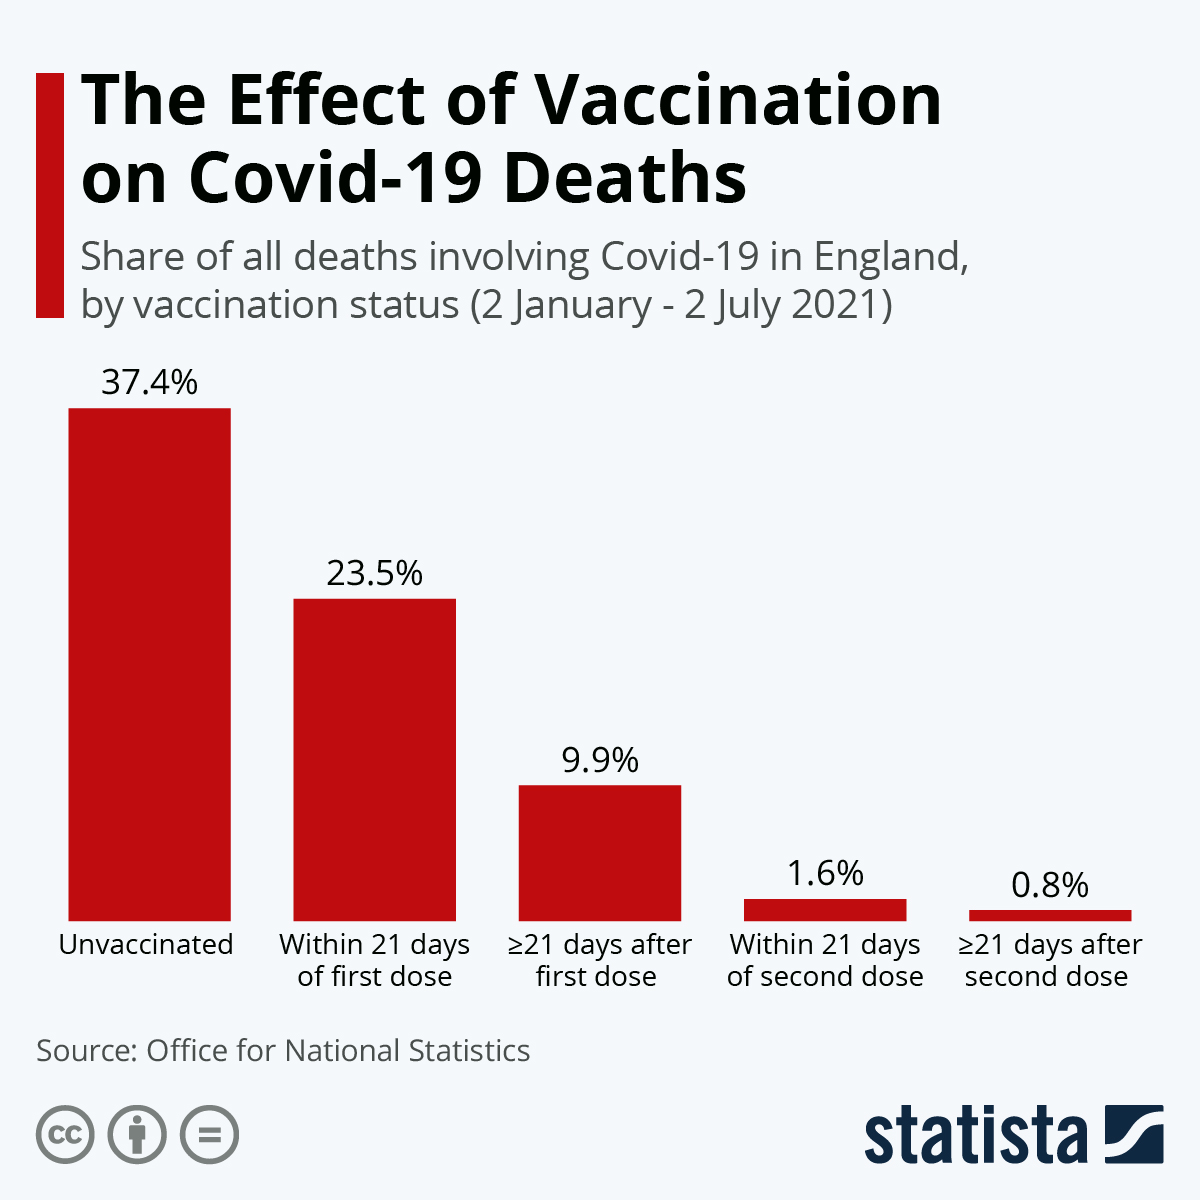 The Vaccination Effect on Covid-19 Deaths